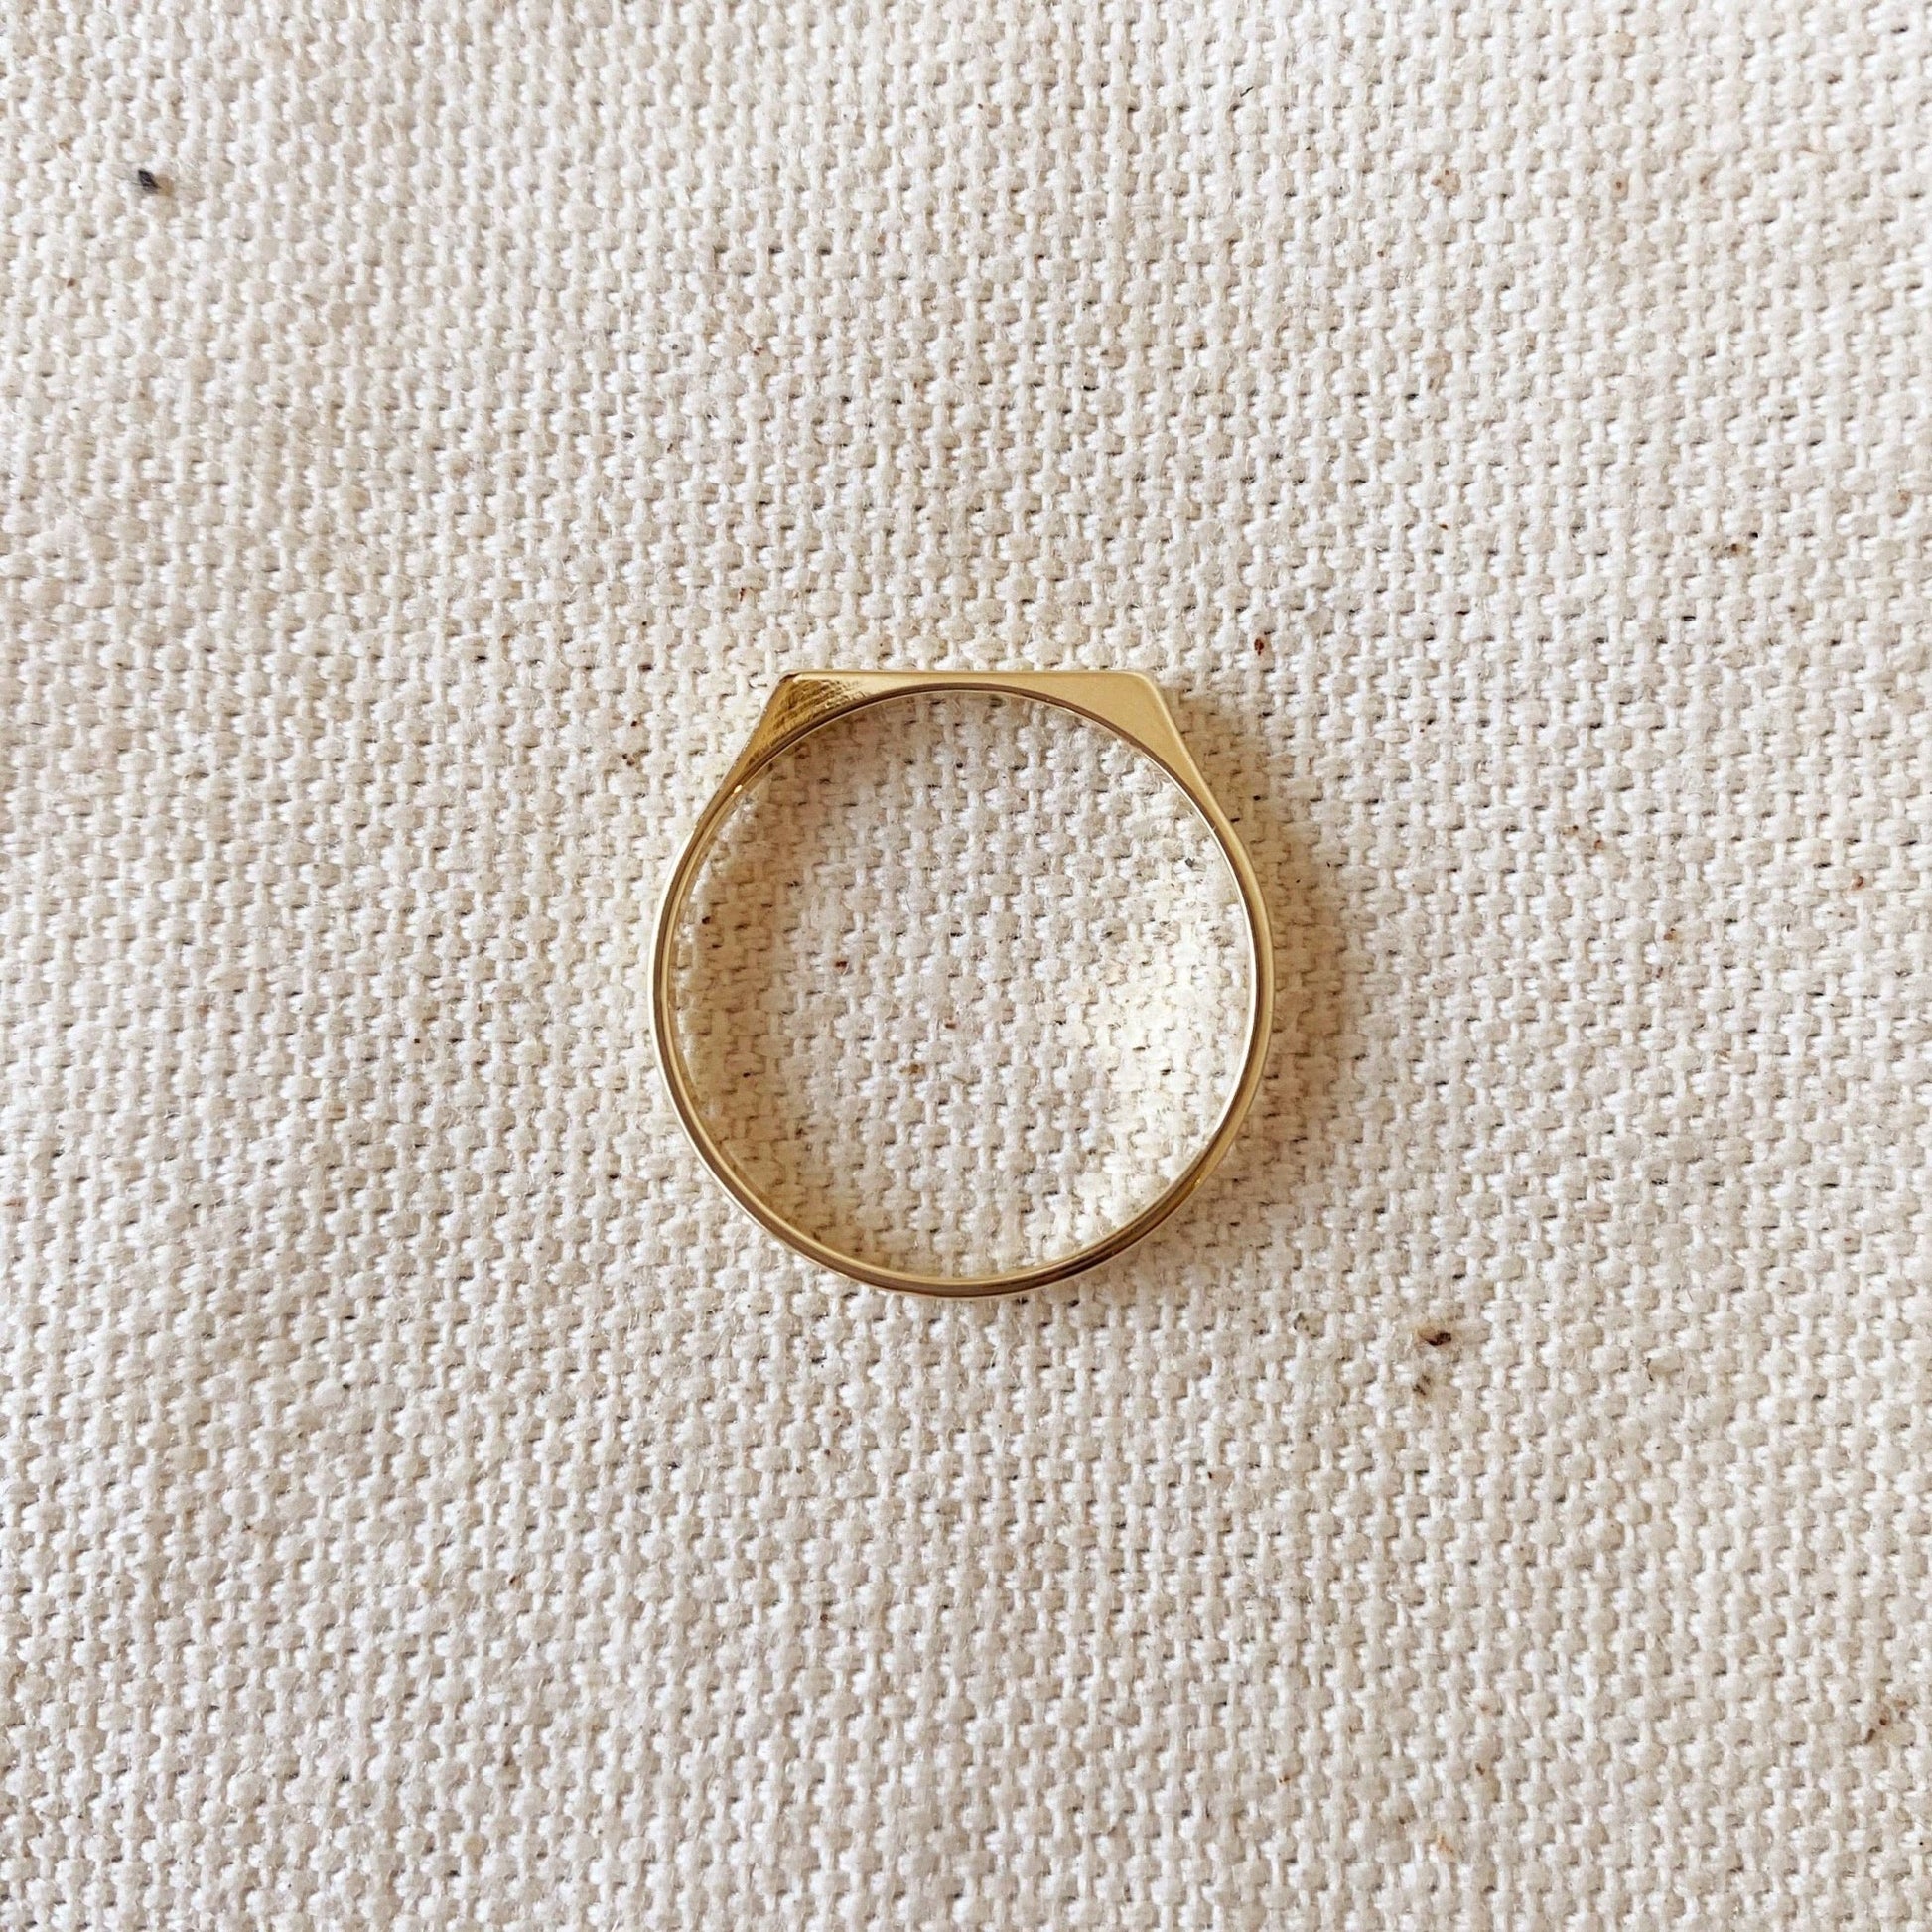 18k Gold Filled Flat Top Ring: 9 - FOREVERLINKX